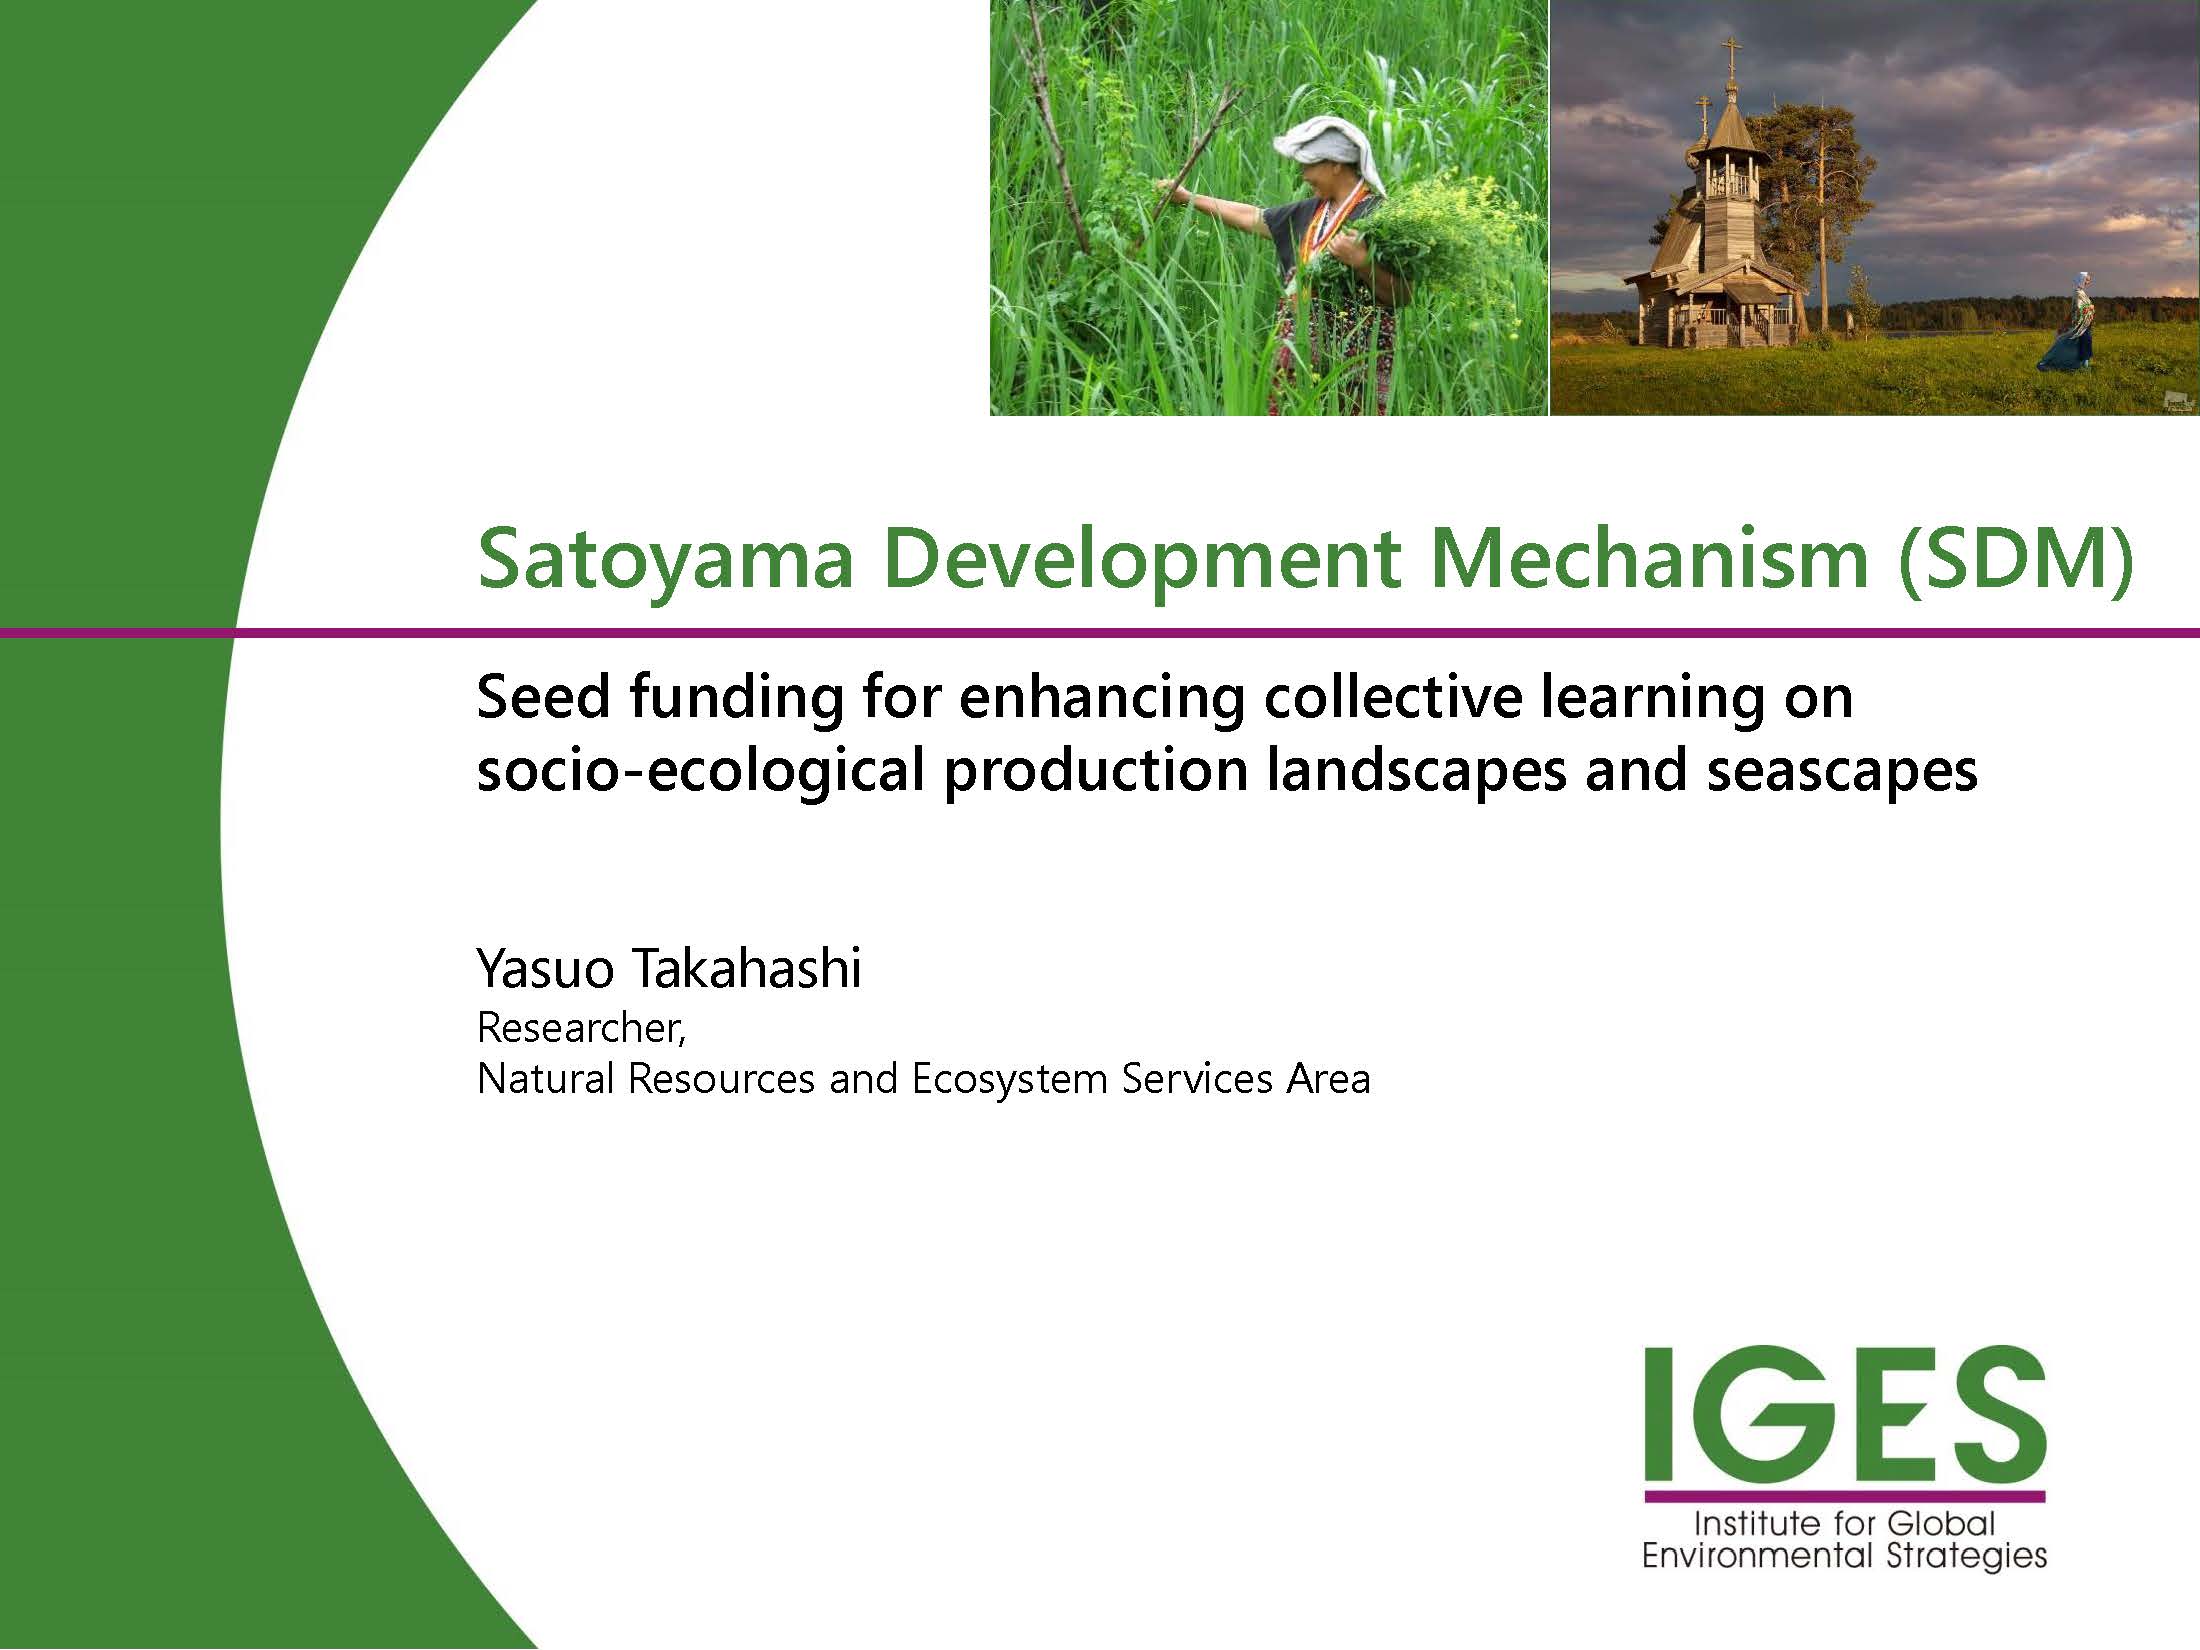 SatoyamaDevelopmentMechanism (SDM): Seed funding for enhancing collective learning on socio-ecological production landscapes and seascapes